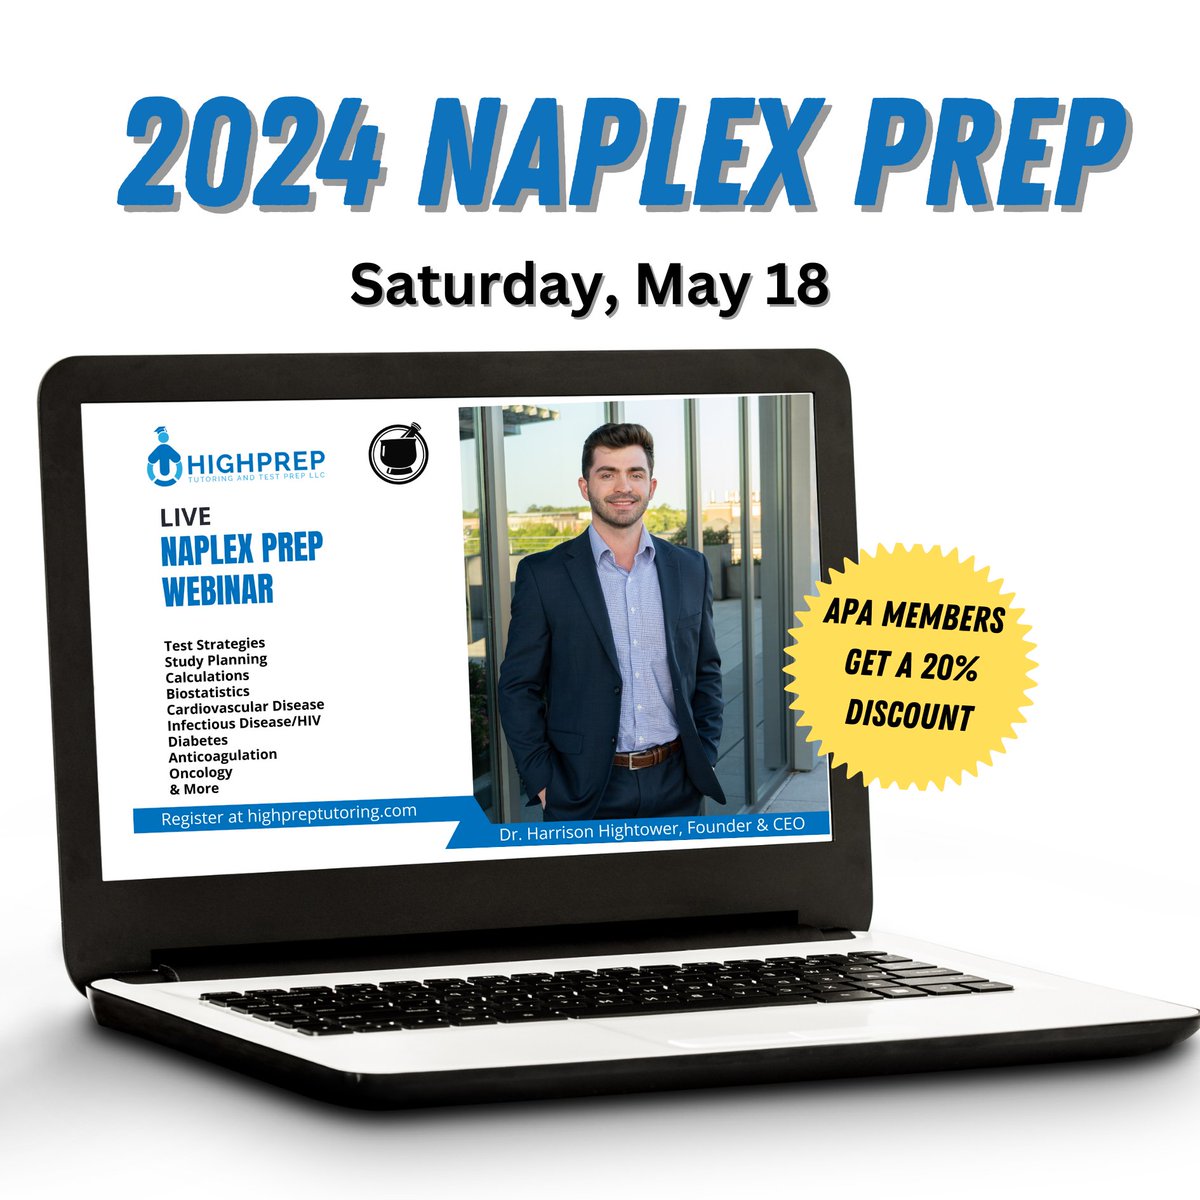 Our partner HighPrep is back again with another summer of NAPLEX Prep webinars! The first one is coming up soon; be sure to take advantage of this fantastic resource. 🗓️ Saturday, May 18 🎉 APA members get 20% discount; check your email for your custom discount code